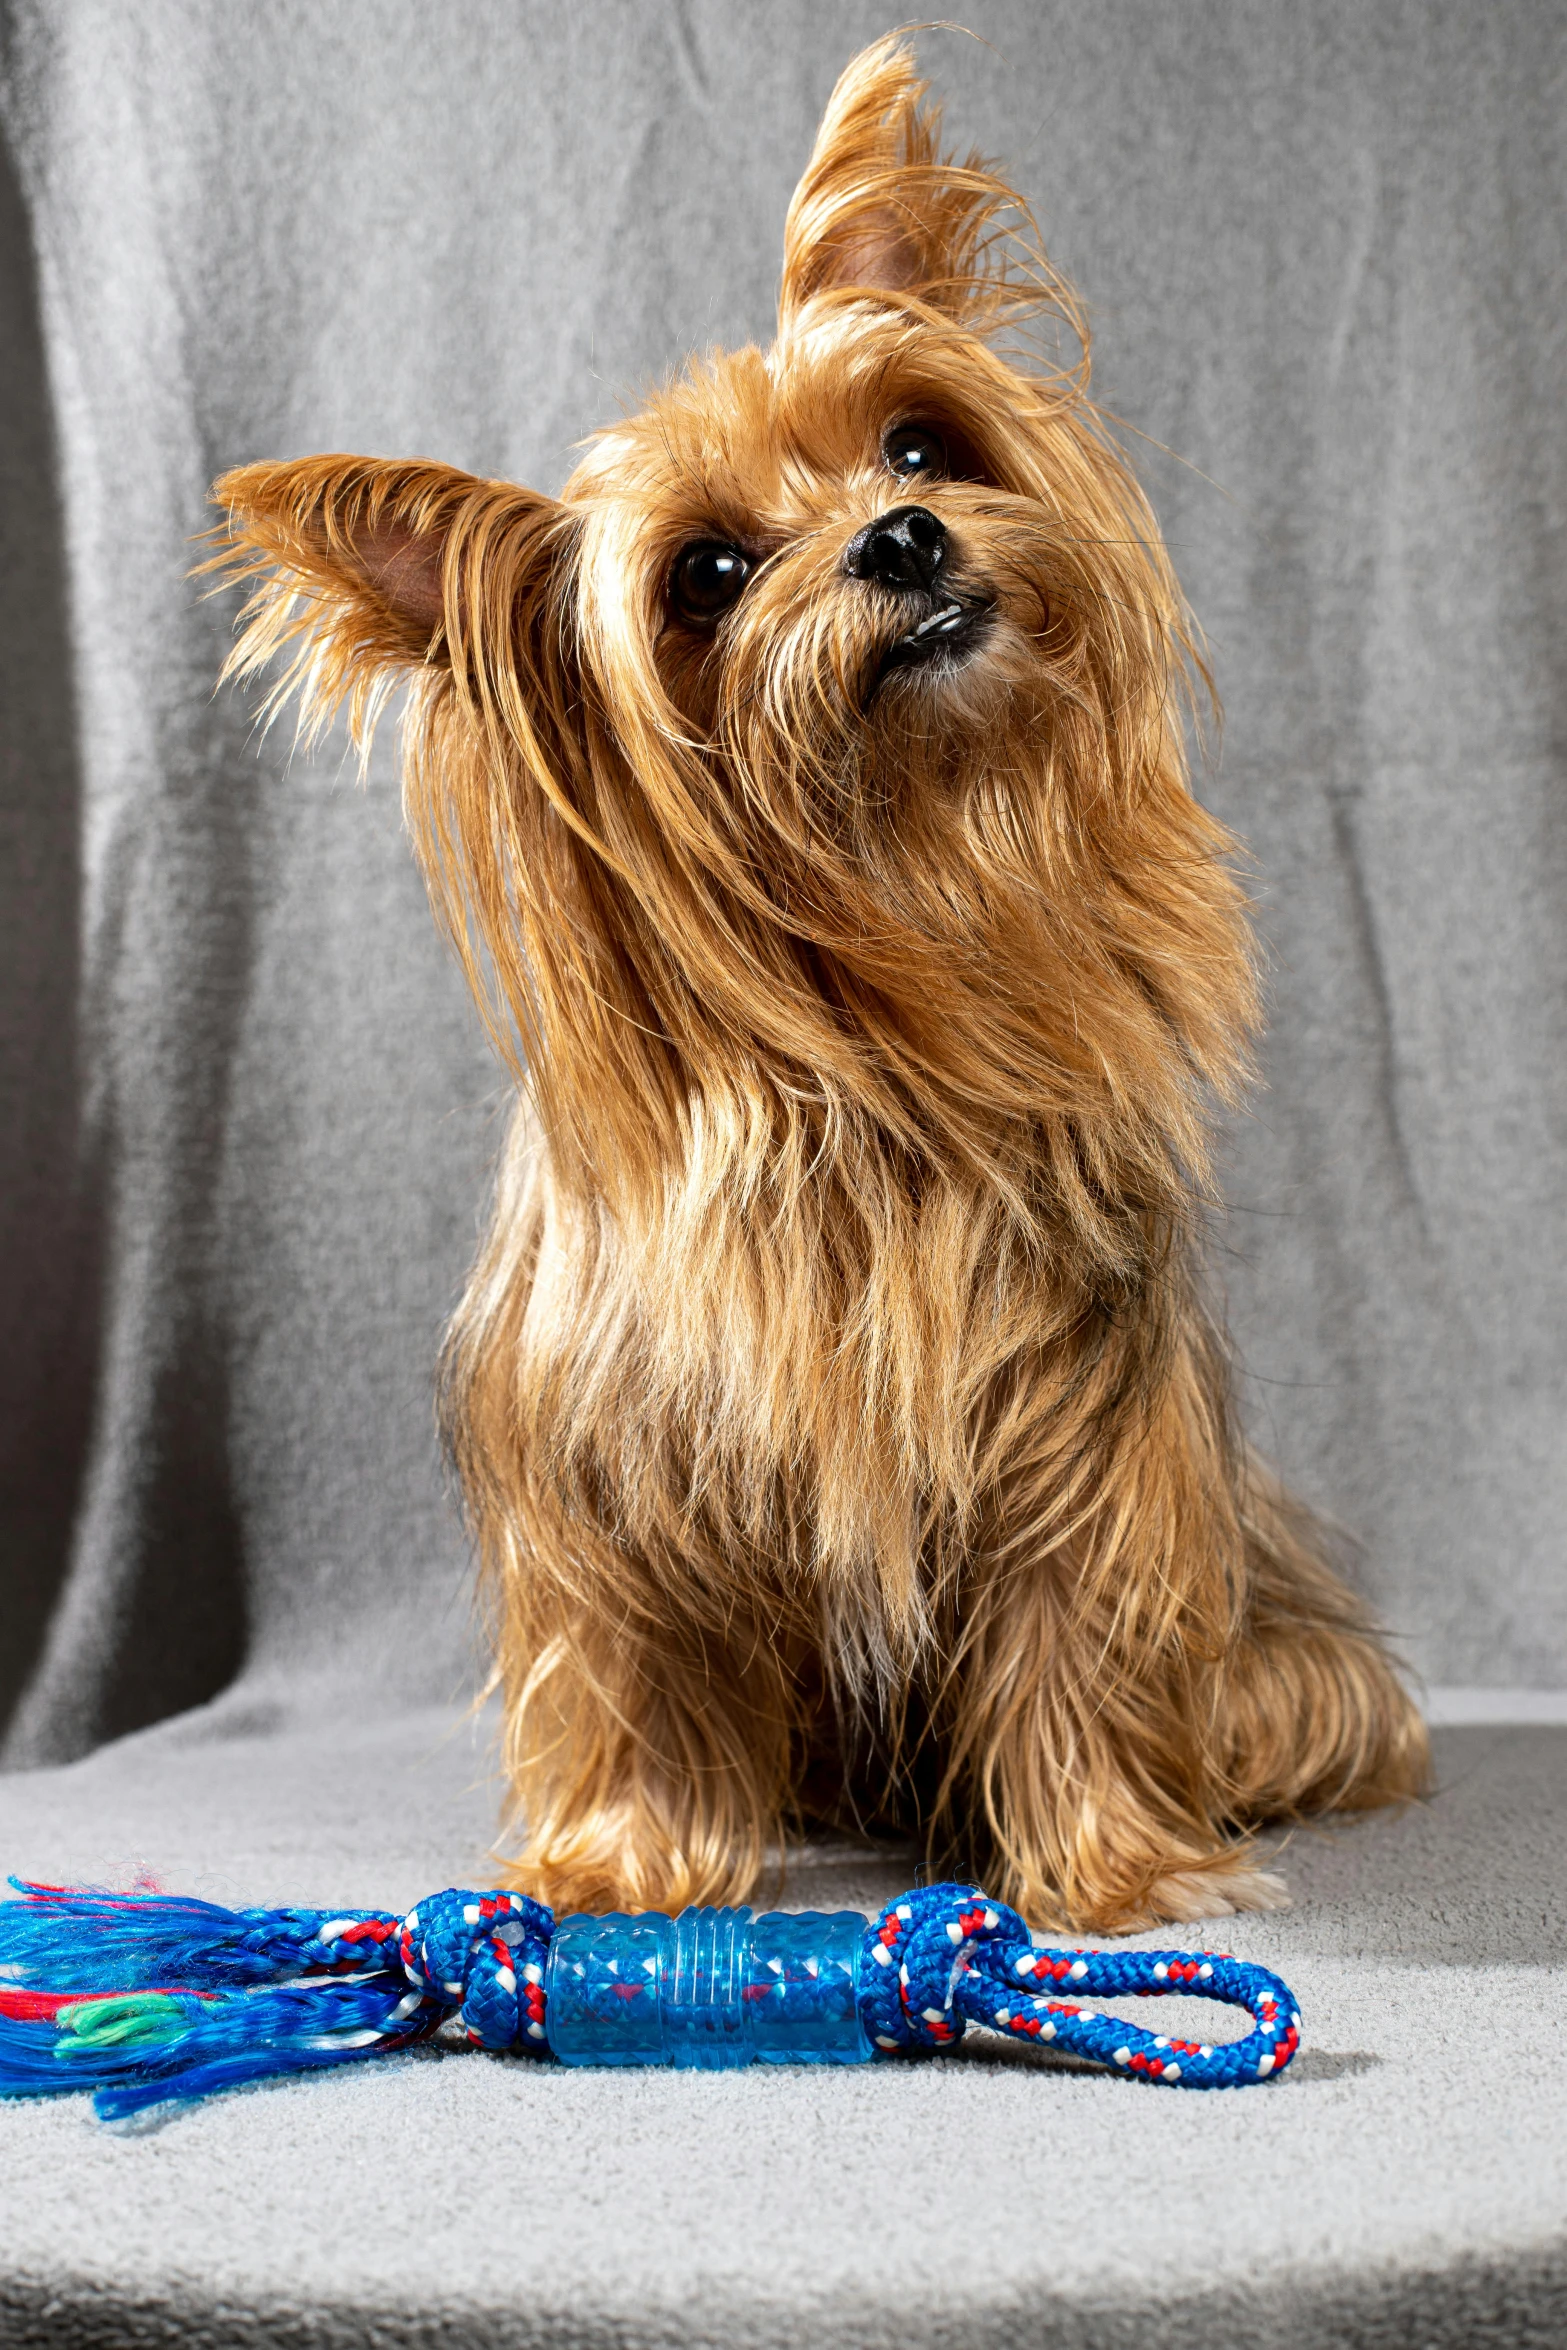 a small brown dog sitting next to a toy, ruffles tassels and ribbons, looking off to the side, promo photo, flag